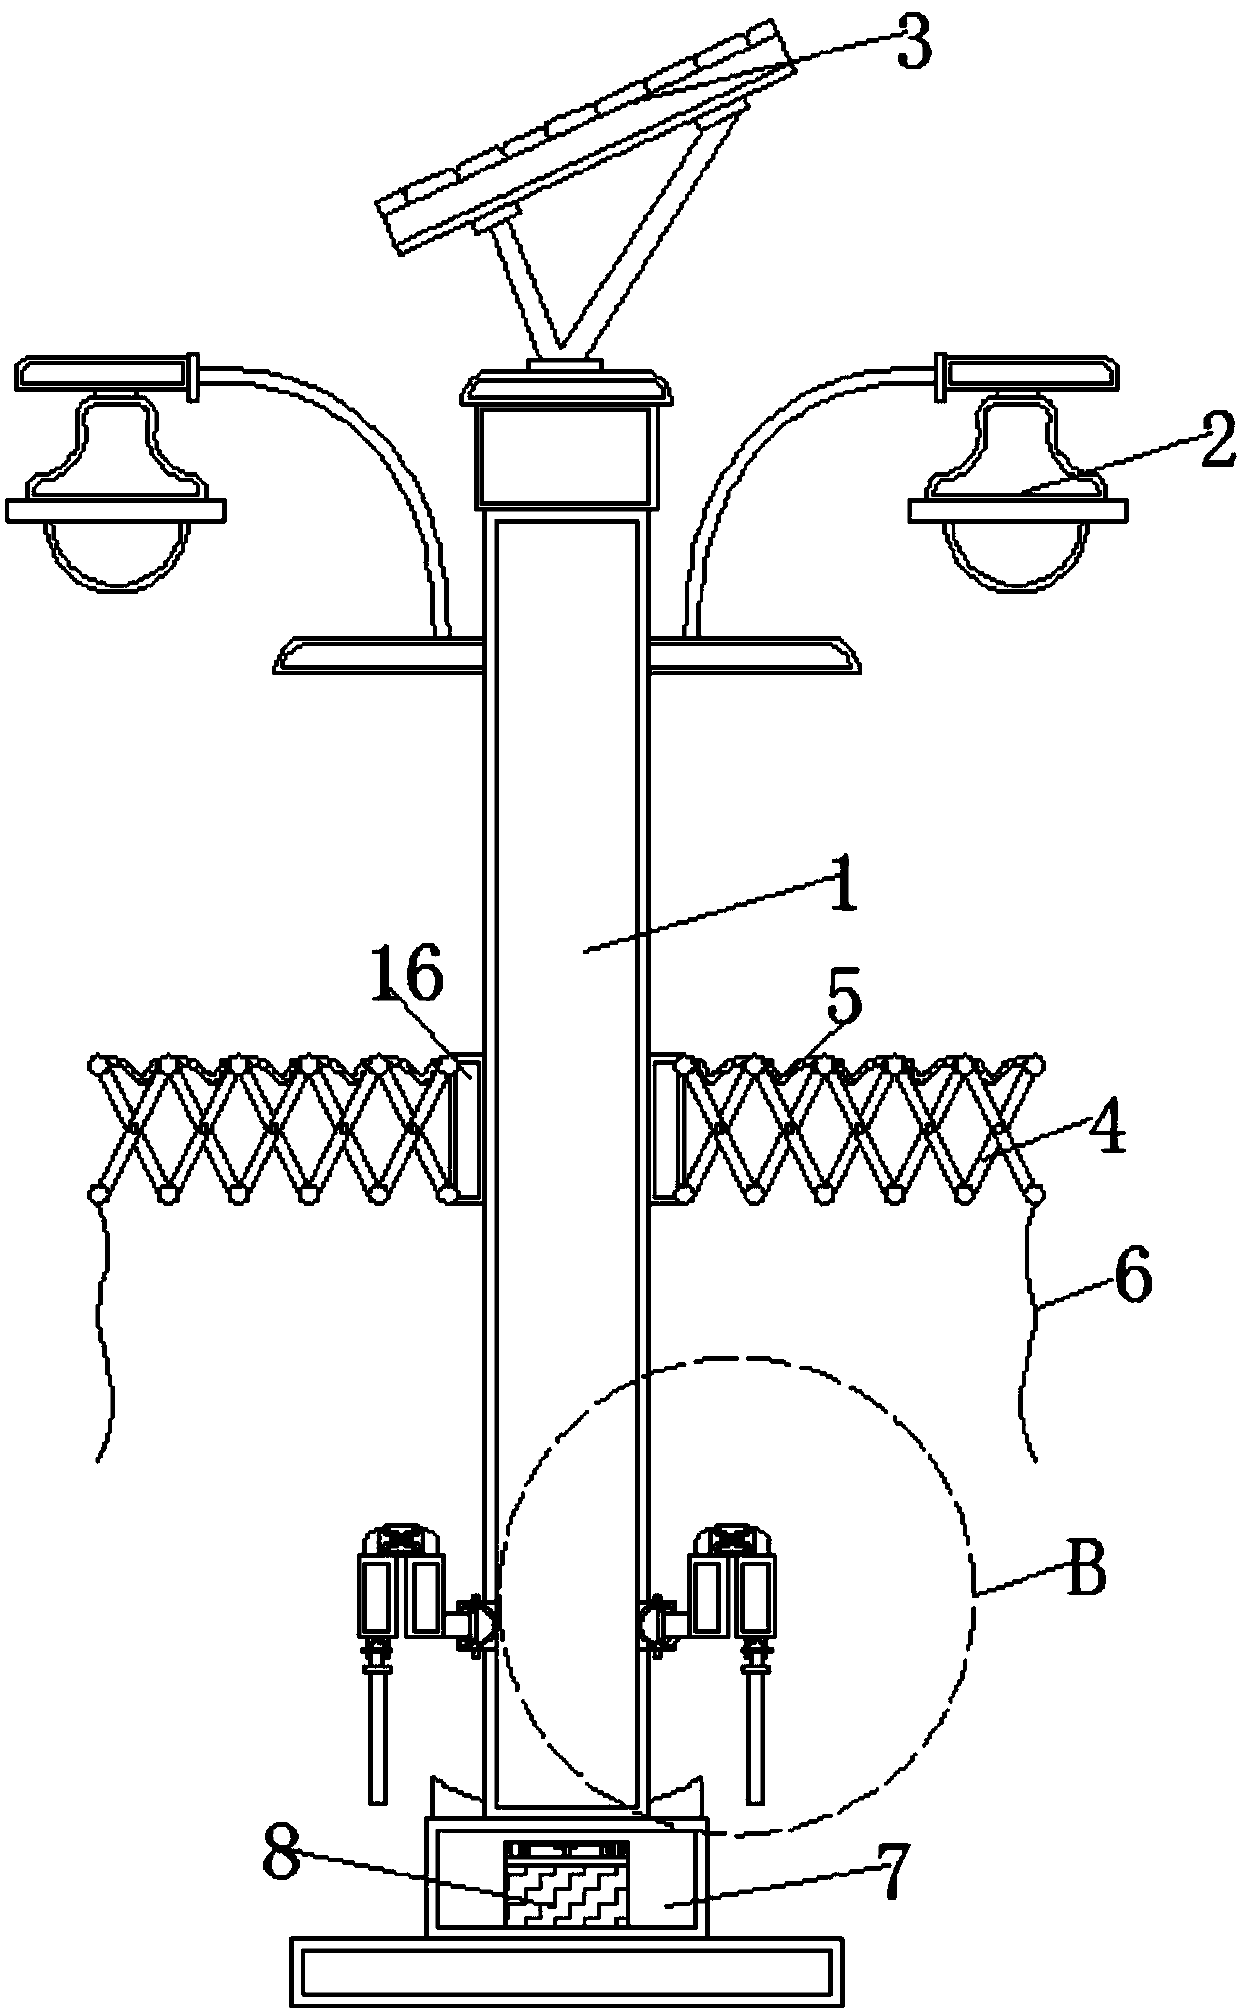 High-power street lamp with folding seat structure